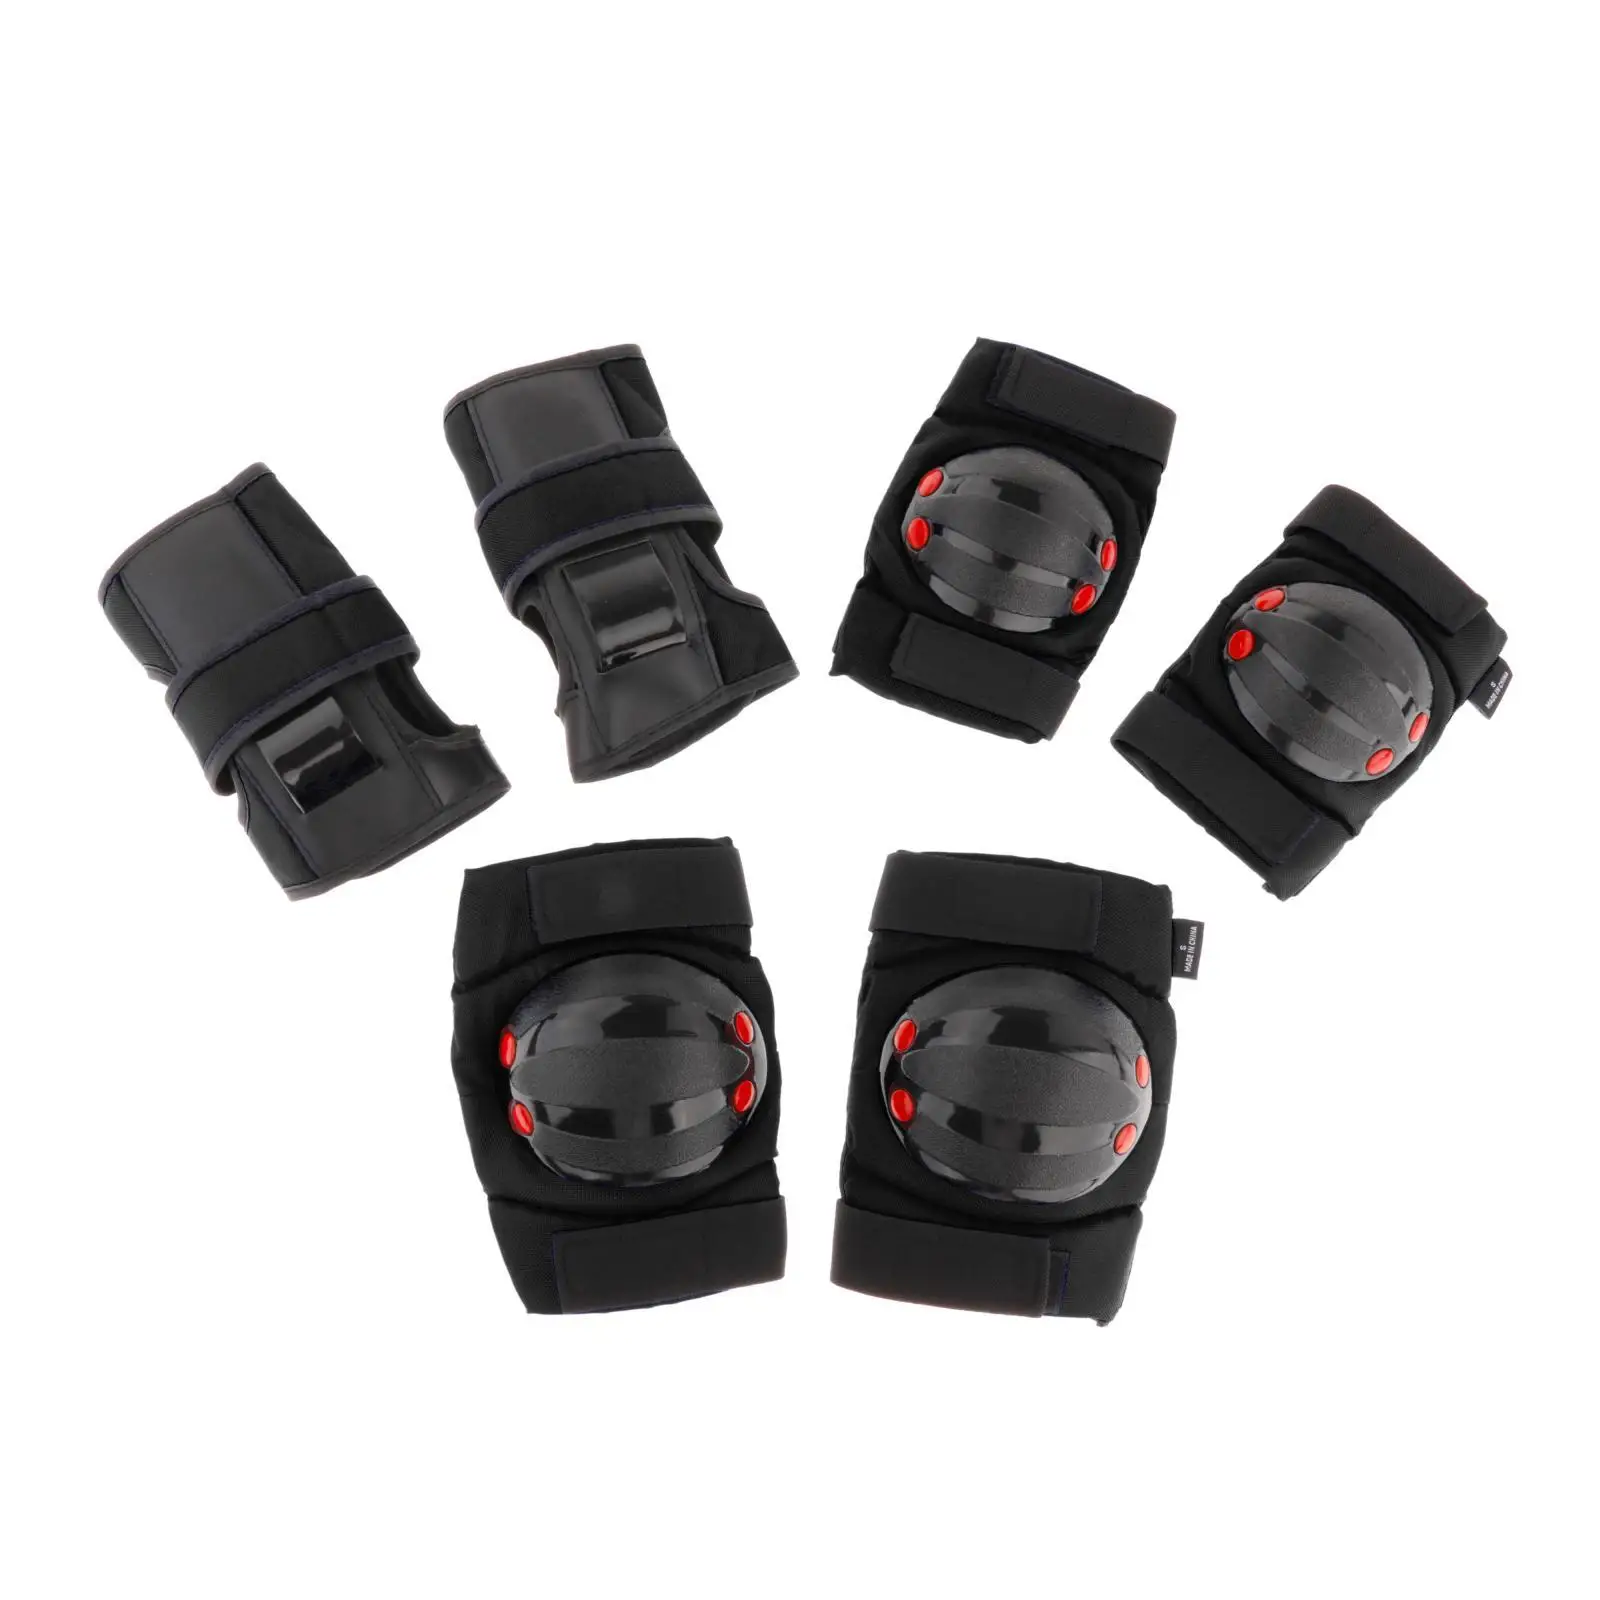 Protective Gear Set Elbow and Knee Pads for Kids Roller Skating Skateboard